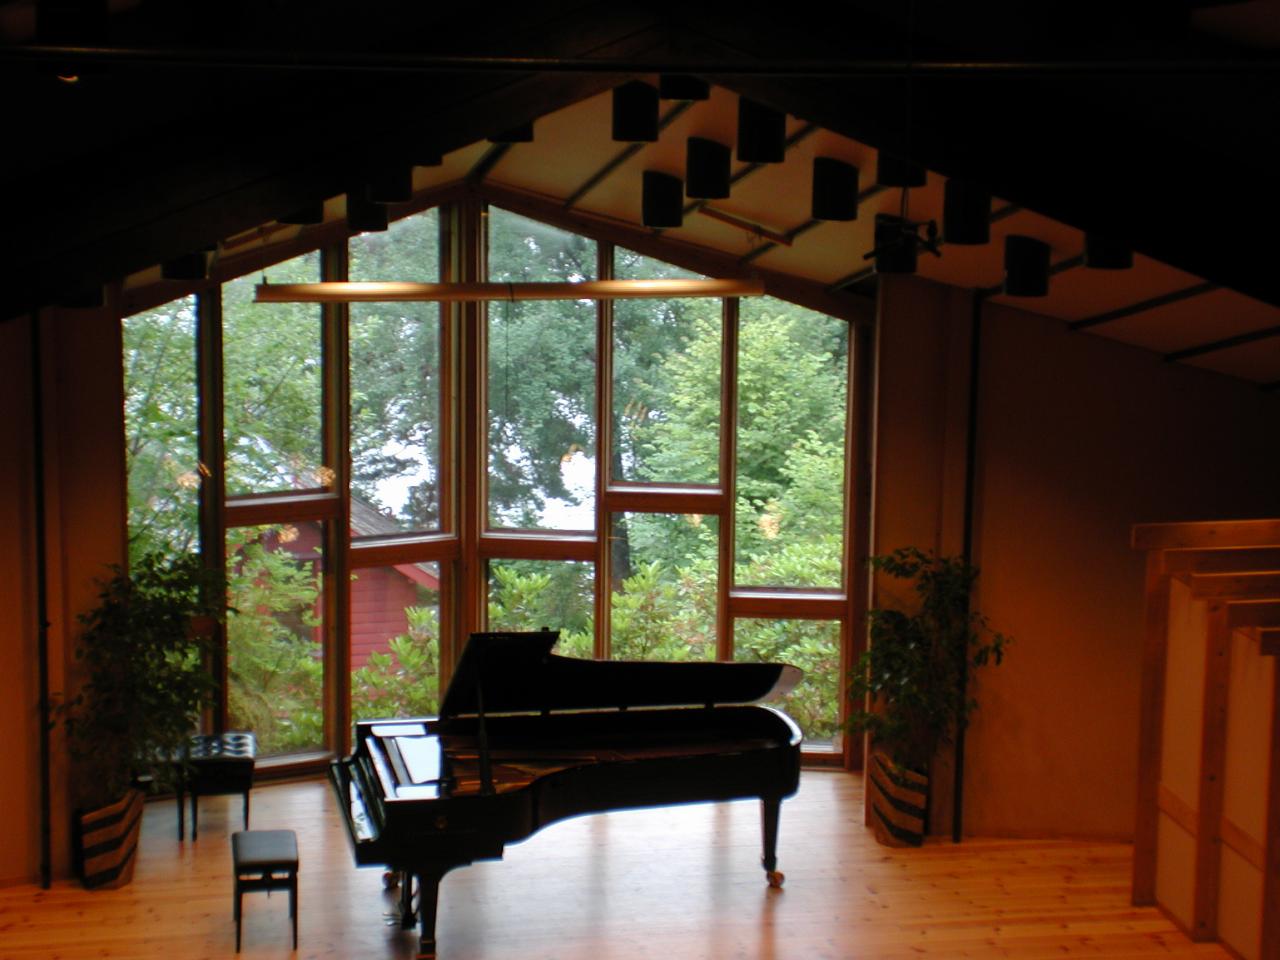 KPLU Viking Jazz: Inside the Concert Hall at Greig's home, with his workshop in the background